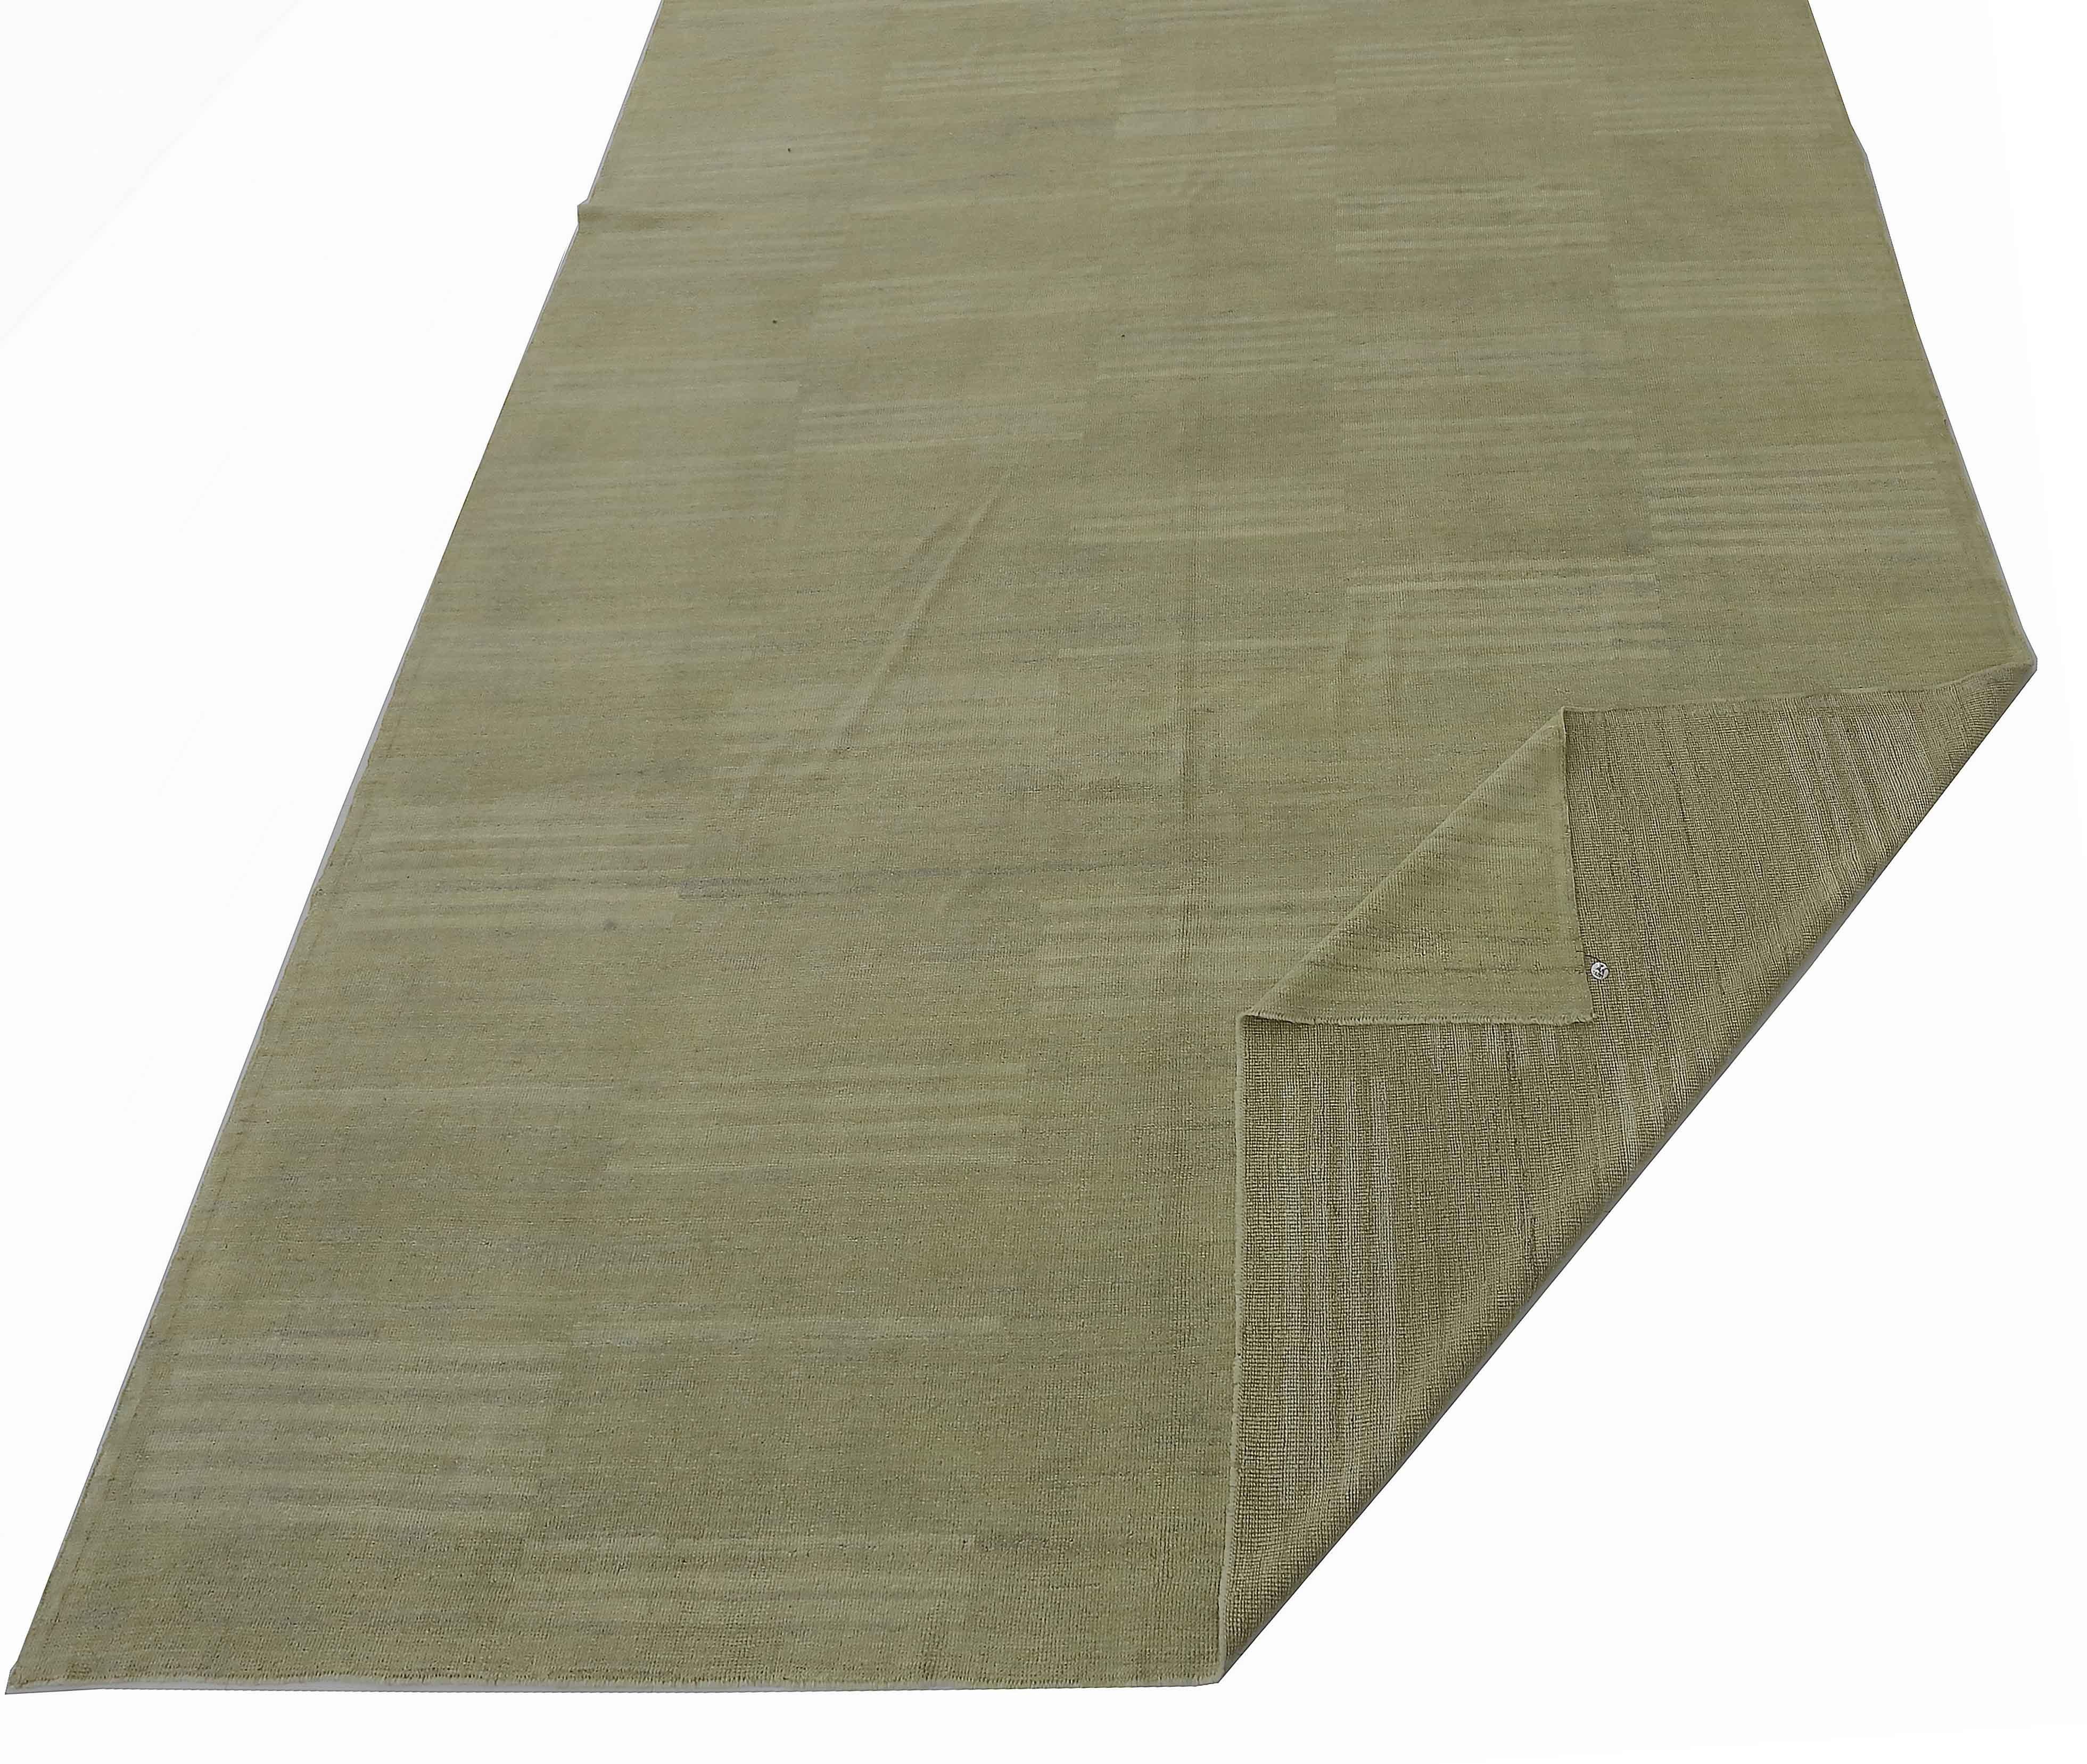 Wool New Persian Flat-Weave Kilim Style Rug with Ivory Stripes on Green Field For Sale